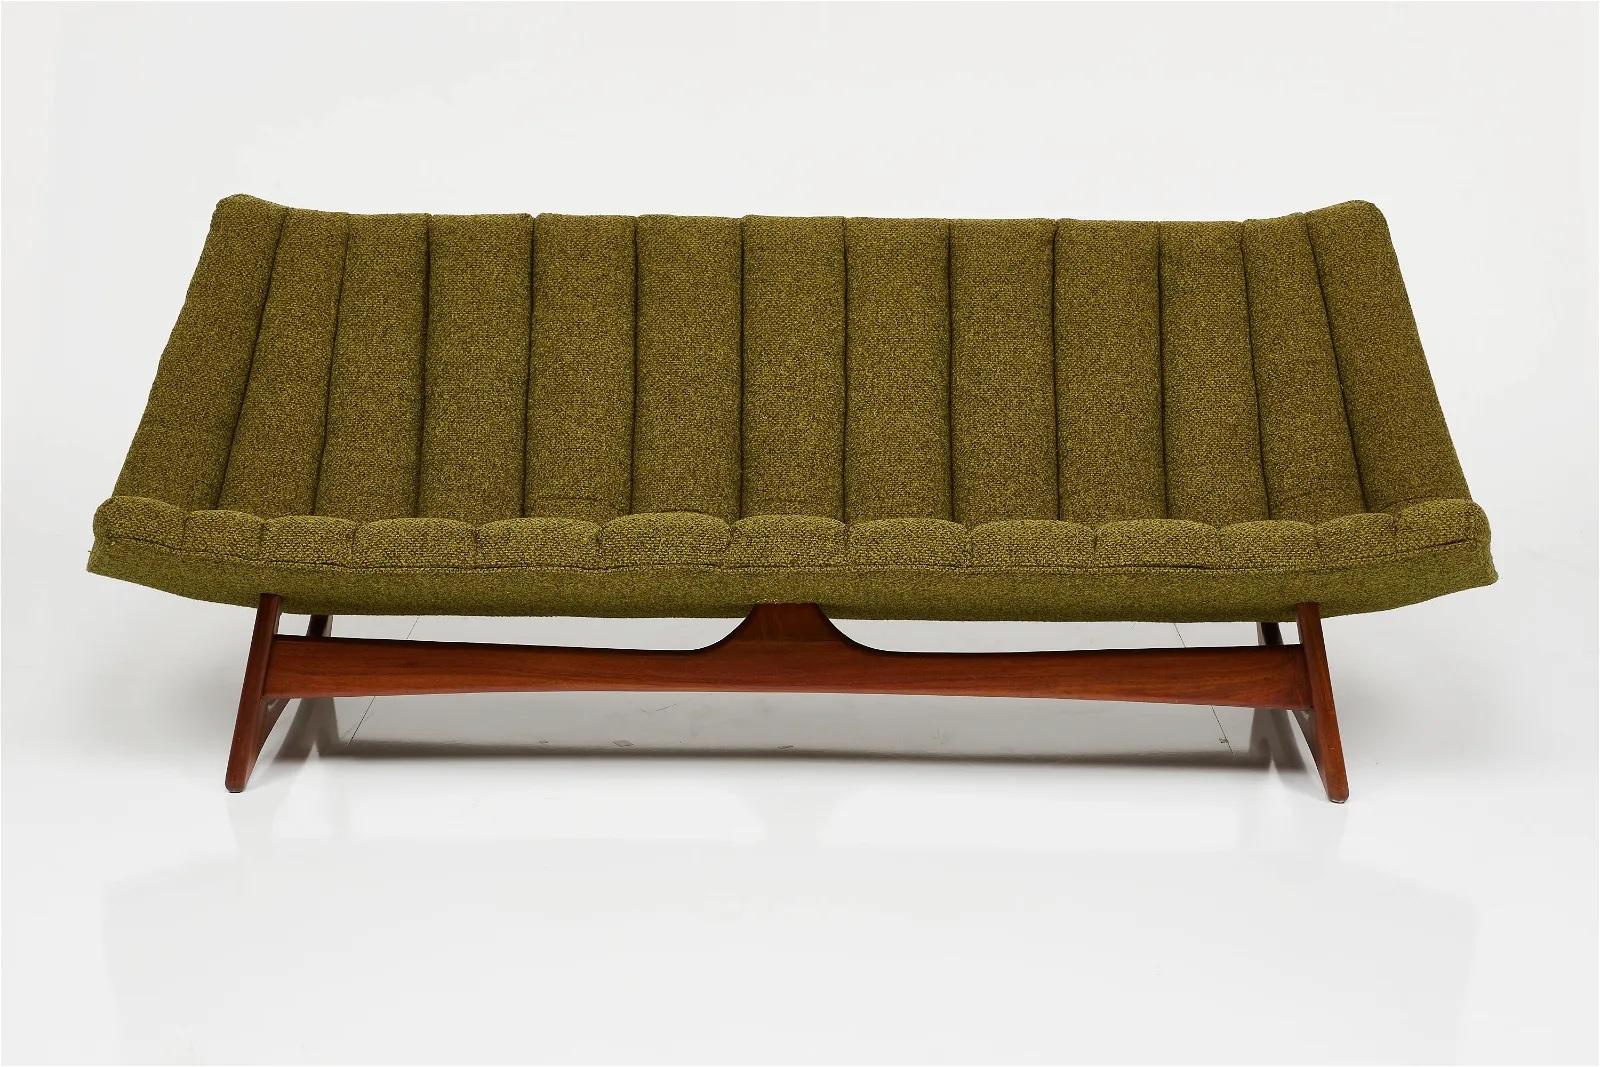 This well taken care of armless sofa by American furniture designer, Adrian Pearsall will surely make your space that much more unique! 

This armless sofa was constructed by the Craft Associates in Pennsylvania and is made from fabric and walnut.